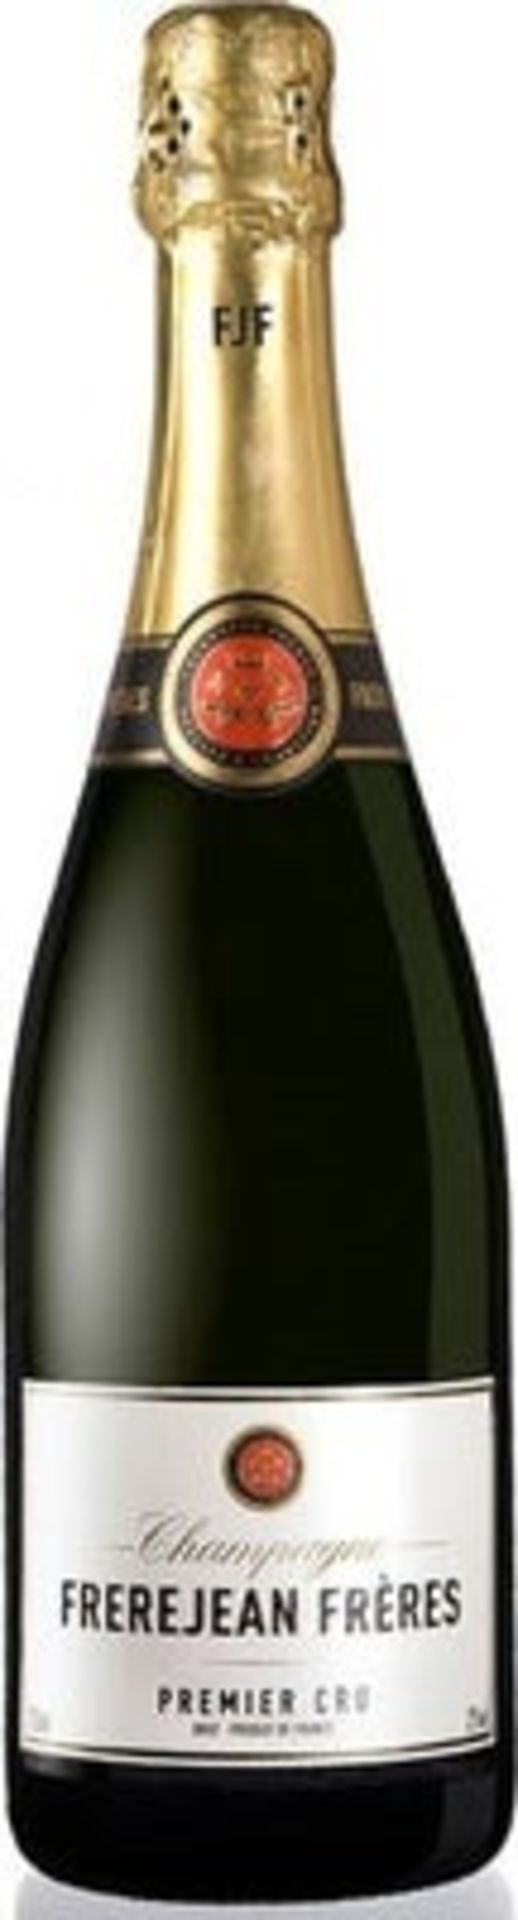 Frerejean Freres Premier Cru Brut, Champagne 2006 ( Bid Is For 1x Bottle Option To Purchase More)